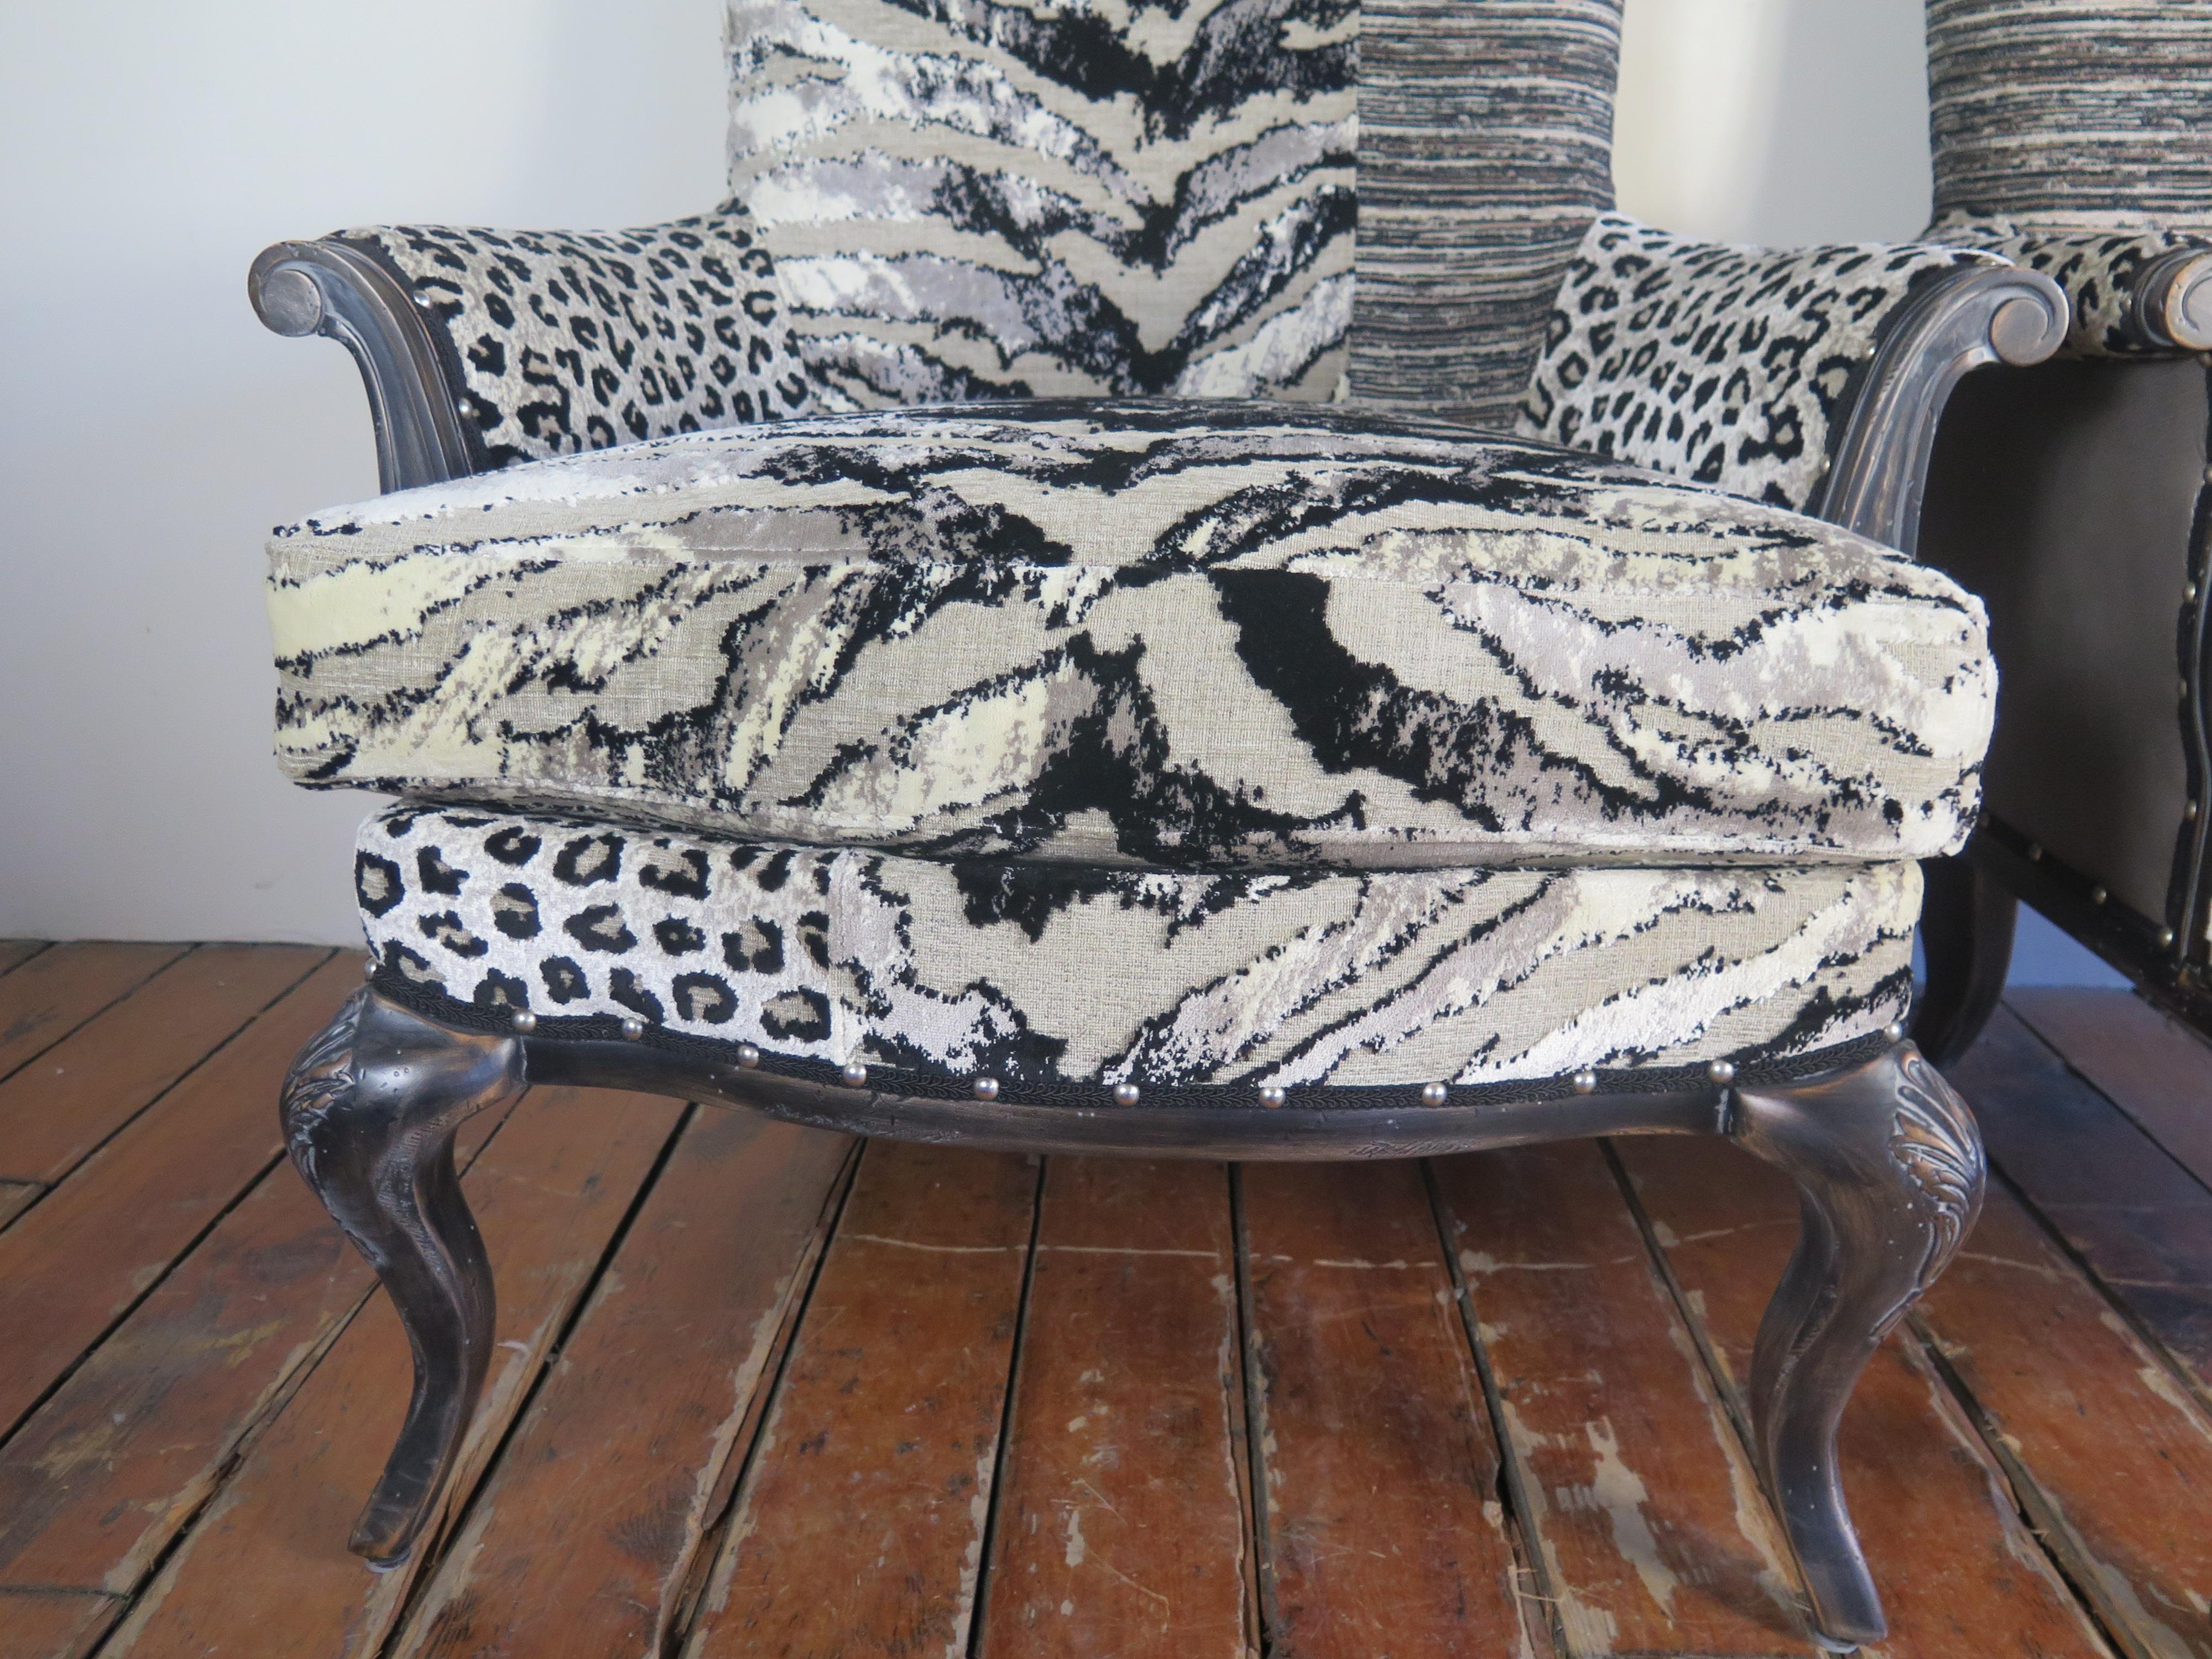 Pair of animal print asymmetrical chairs with leather and nailhead detail.